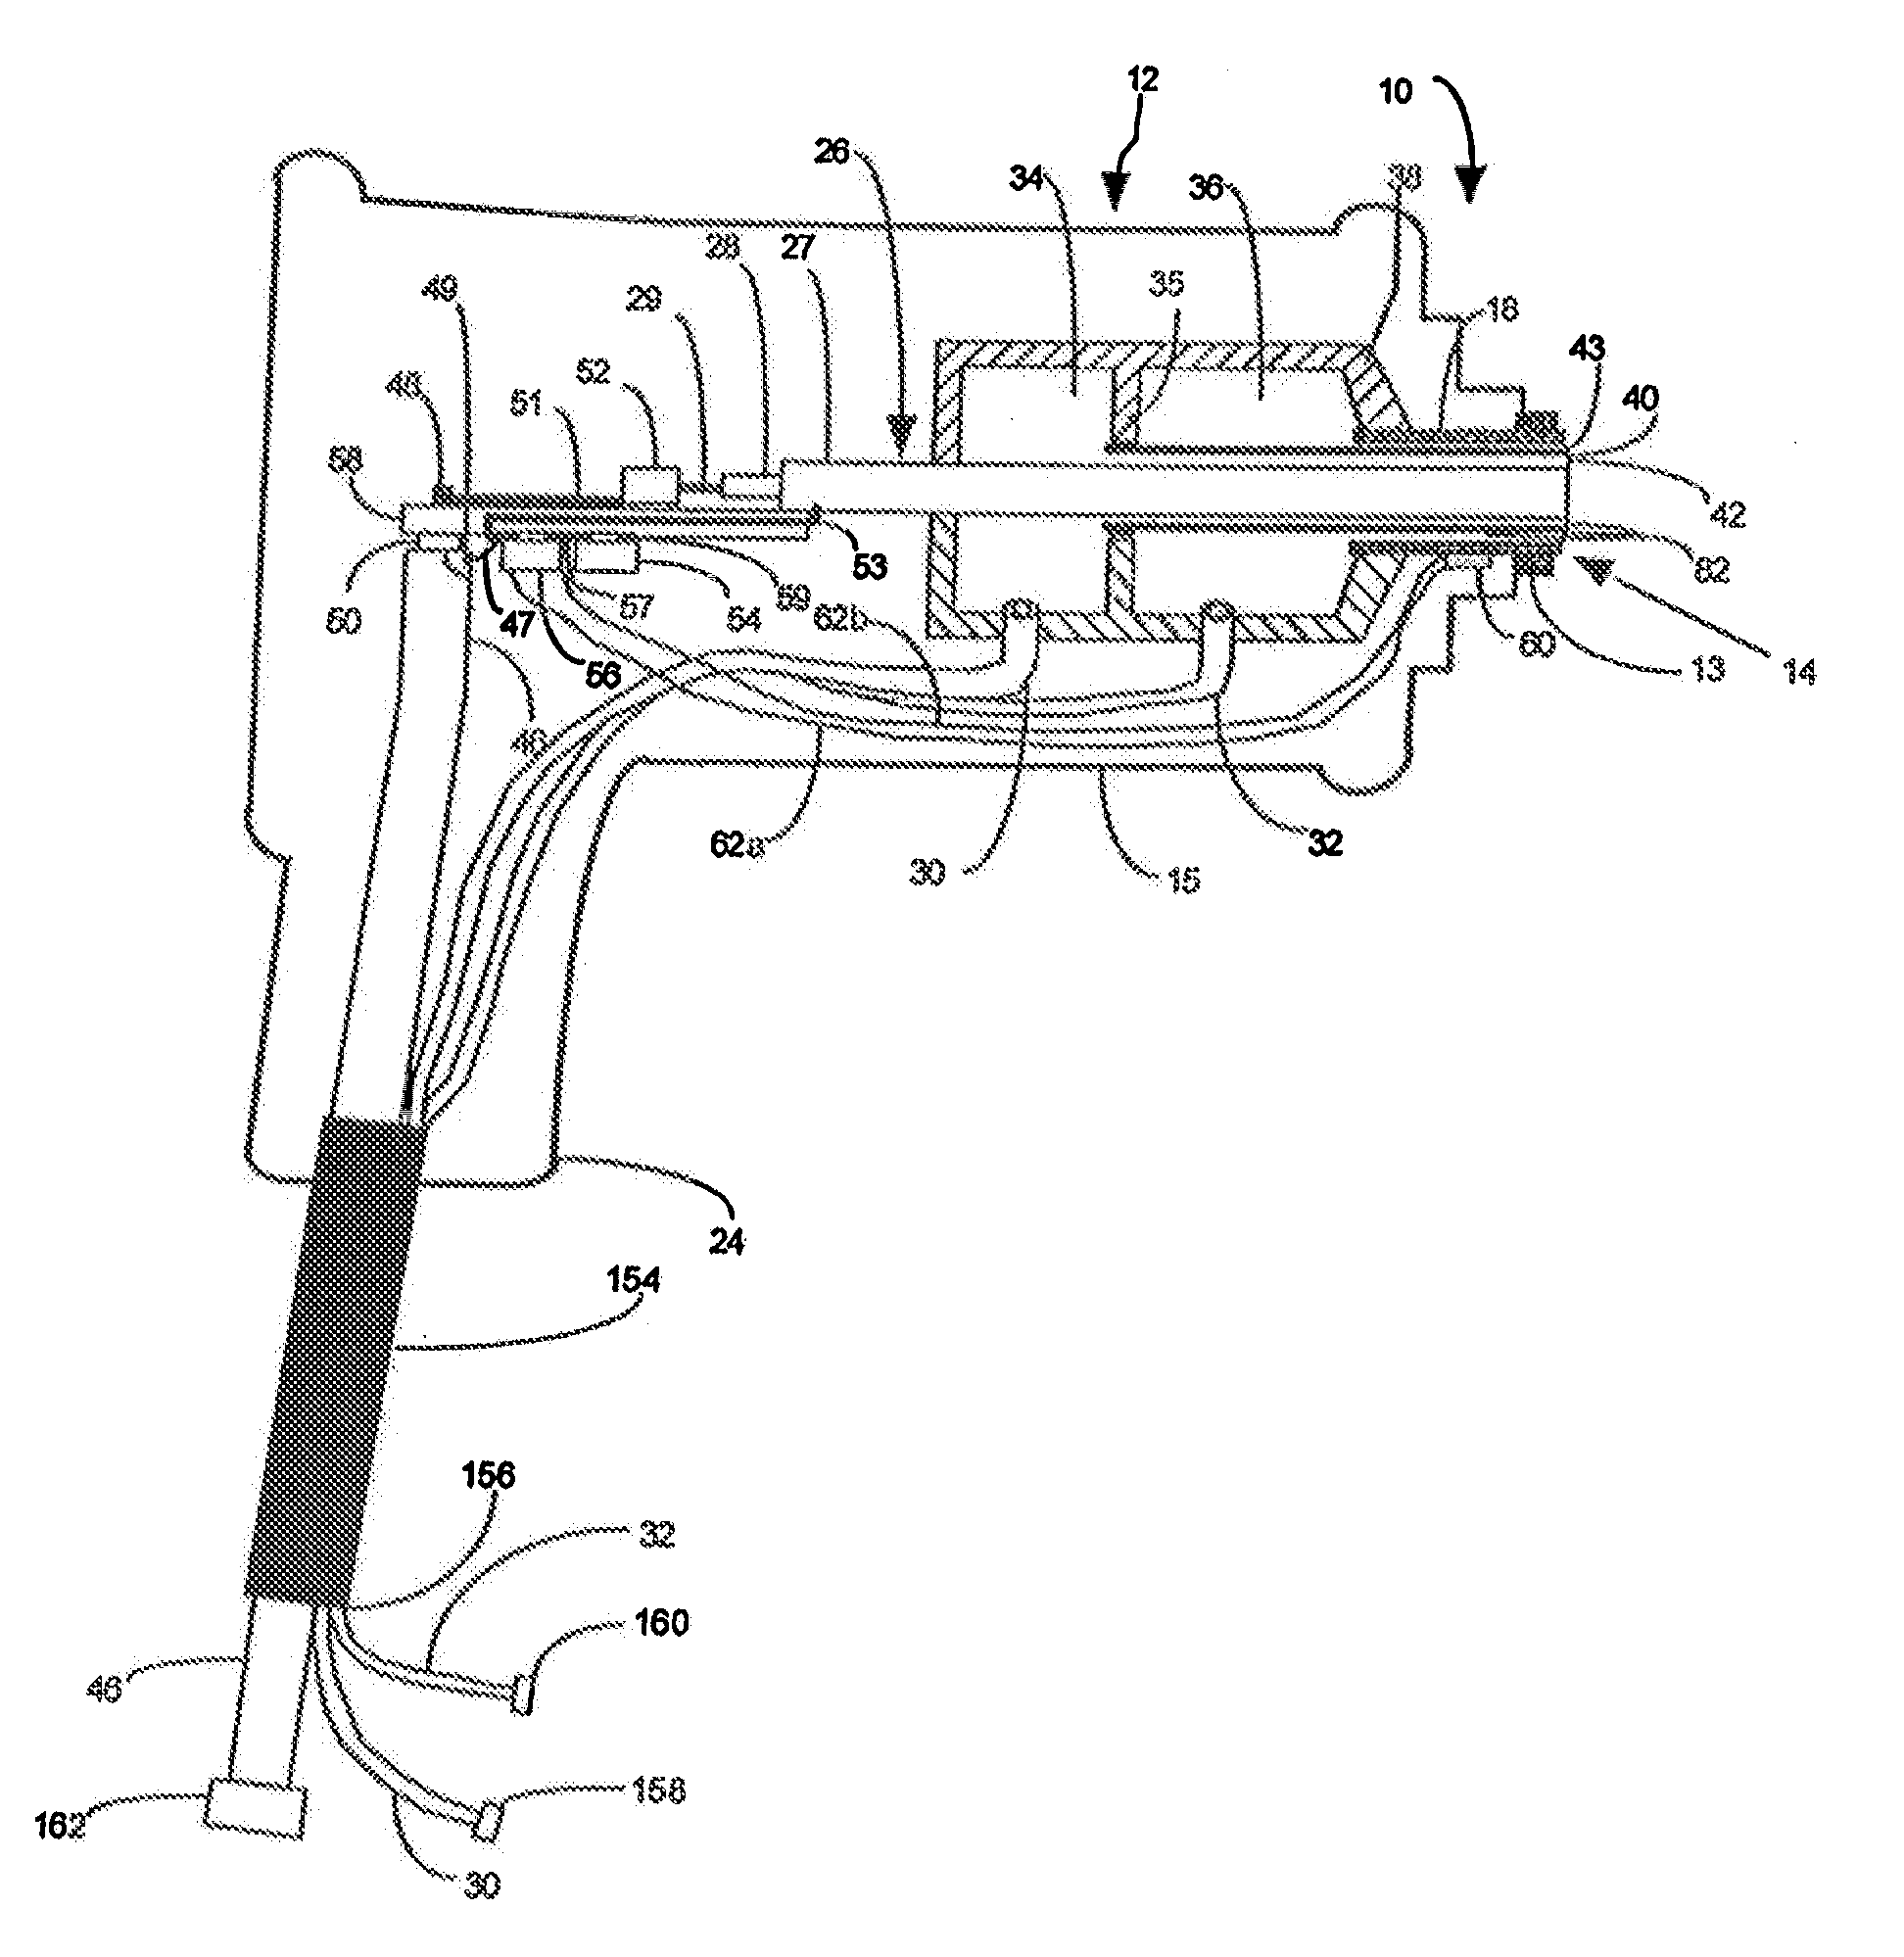 Microwave coagulation applicator and system with fluid injection